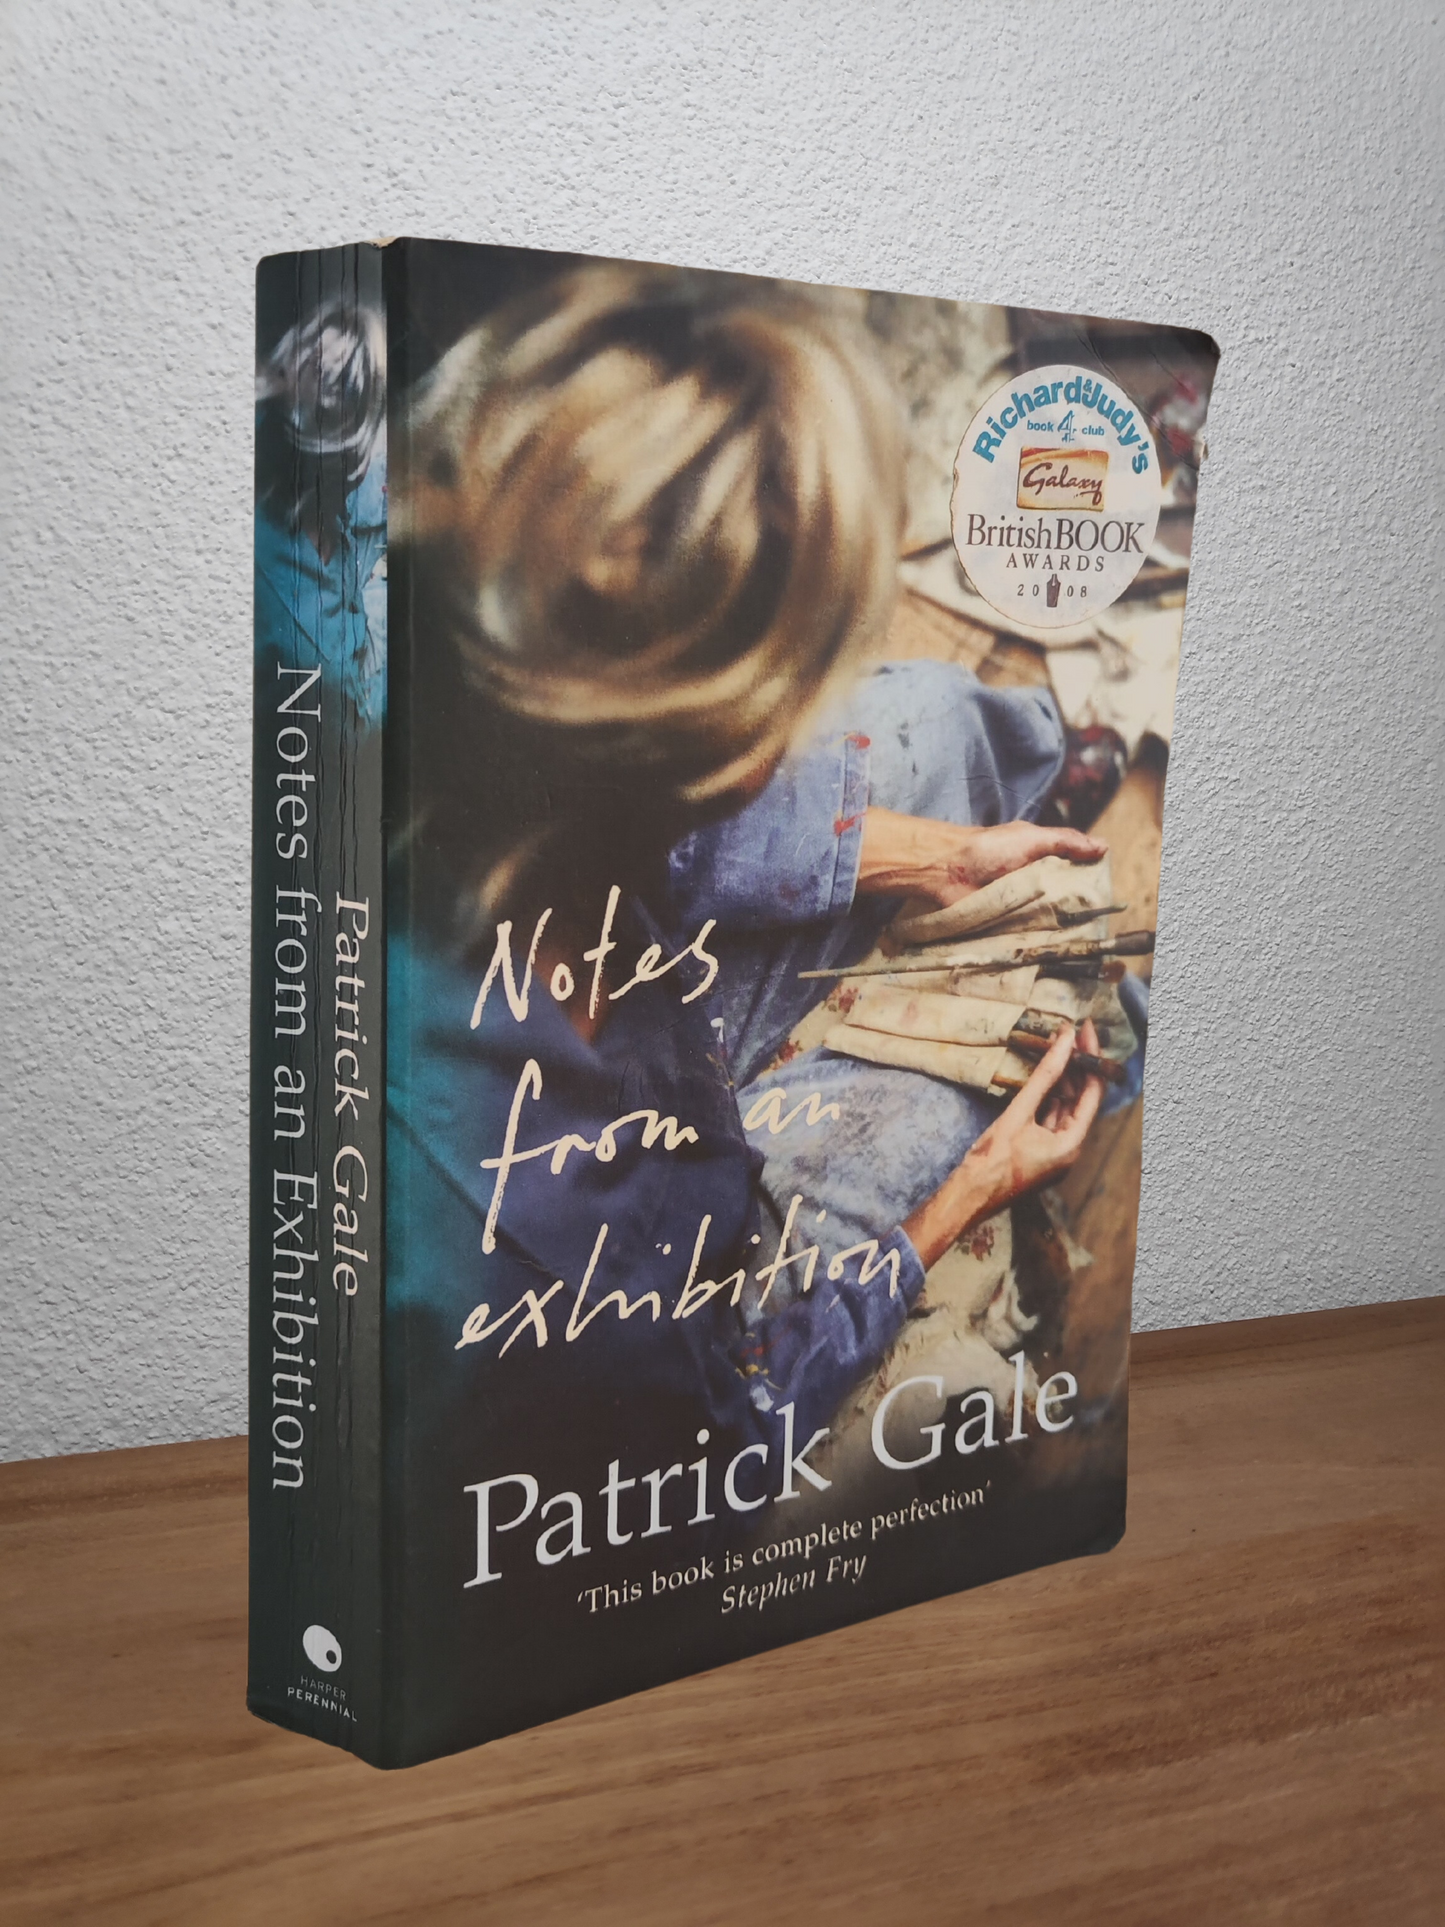 Patrick Gale - Notes from an Exhibition